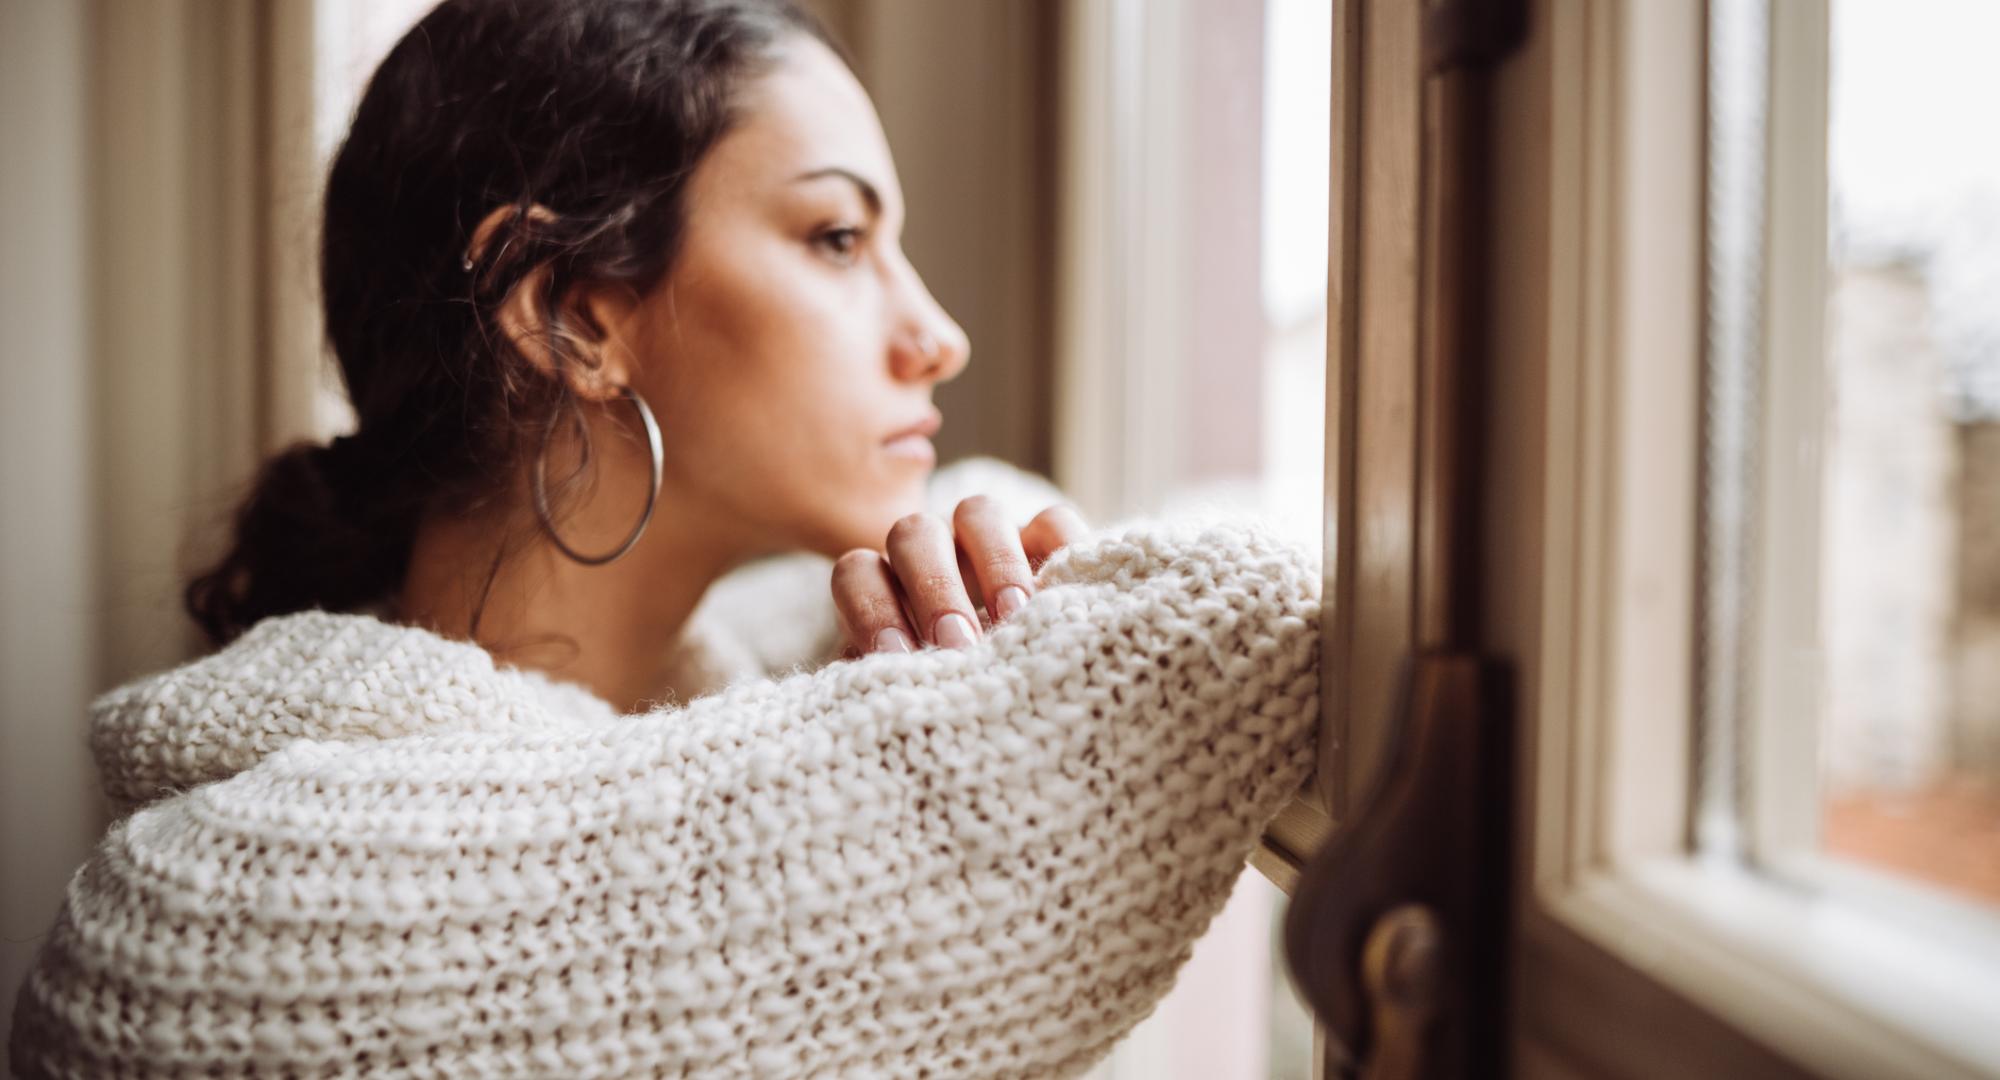 Young woman looking out window